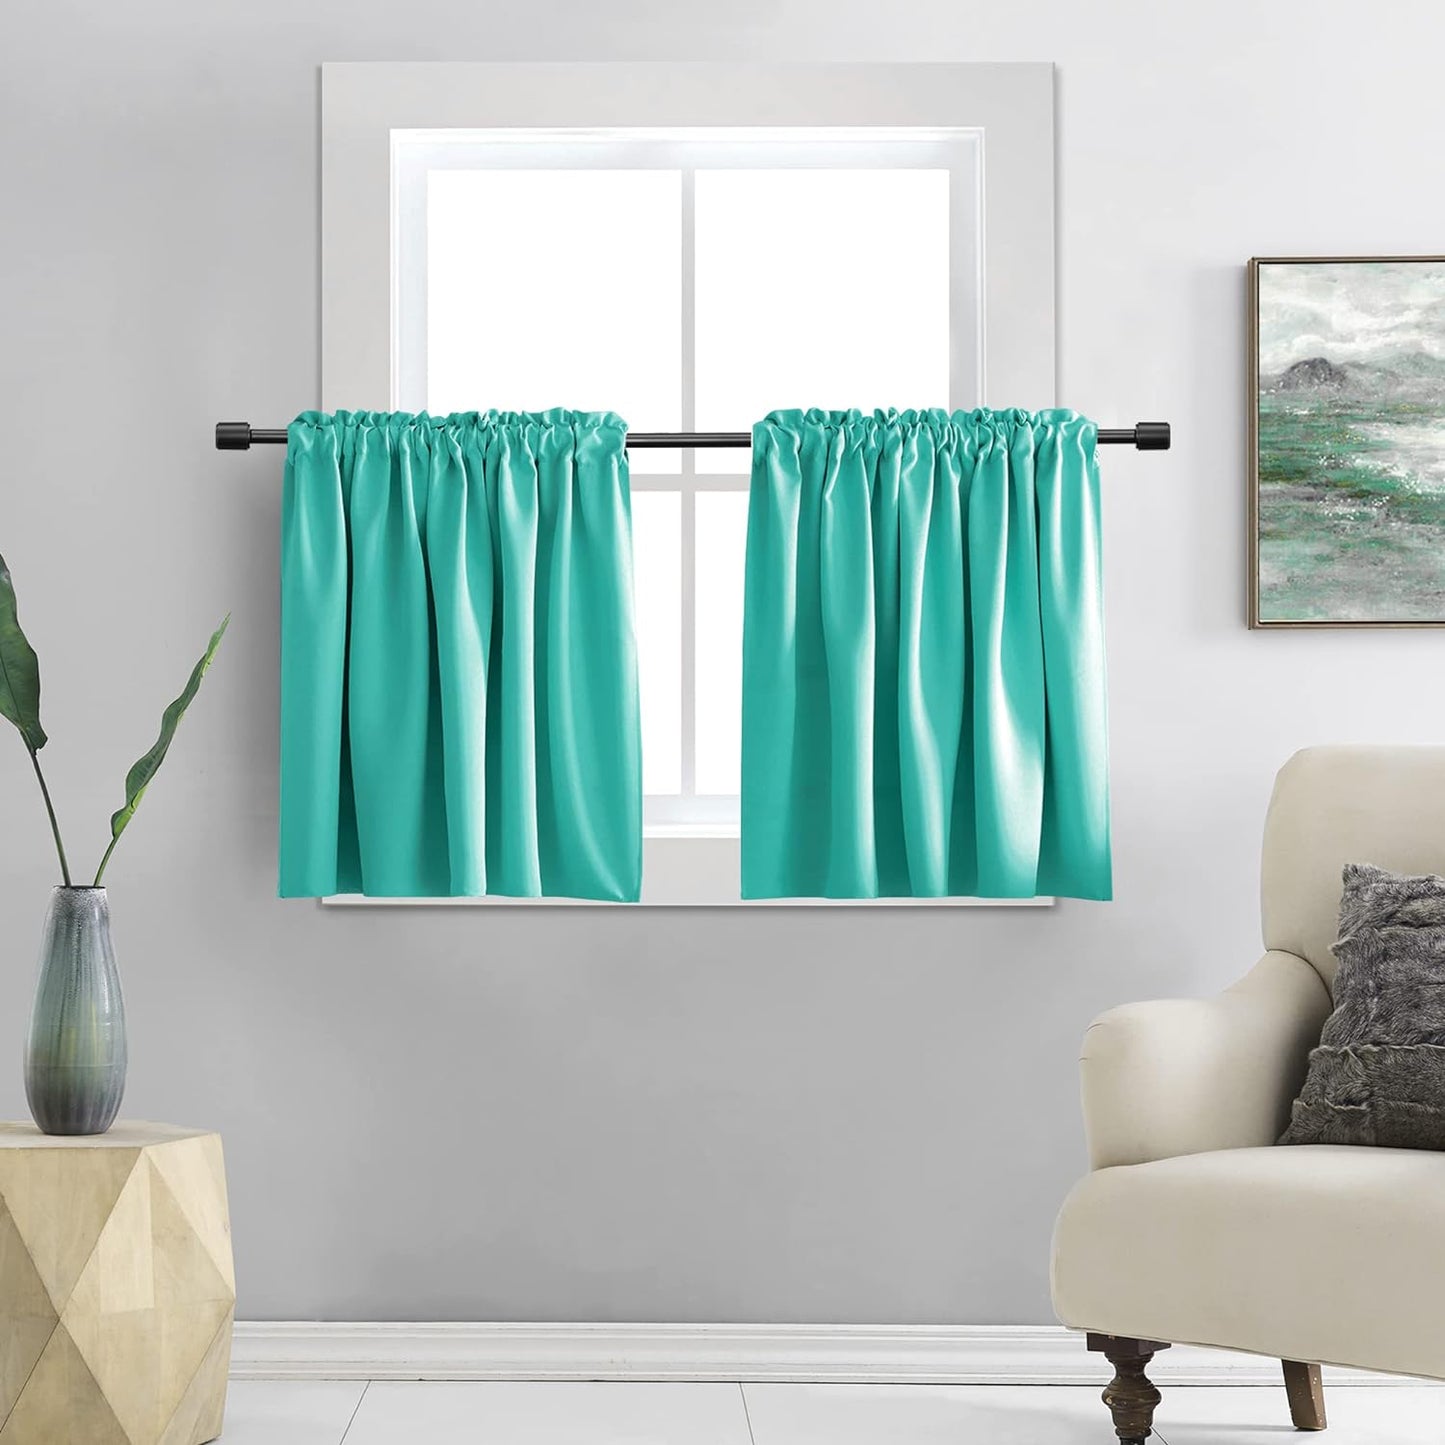 DONREN 24 Inch Length Curtains- 2 Panels Blackout Thermal Insulating Small Curtain Tiers for Bathroom with Rod Pocket (Black,42 Inch Width)  DONREN Turquoise 42" X 24" 